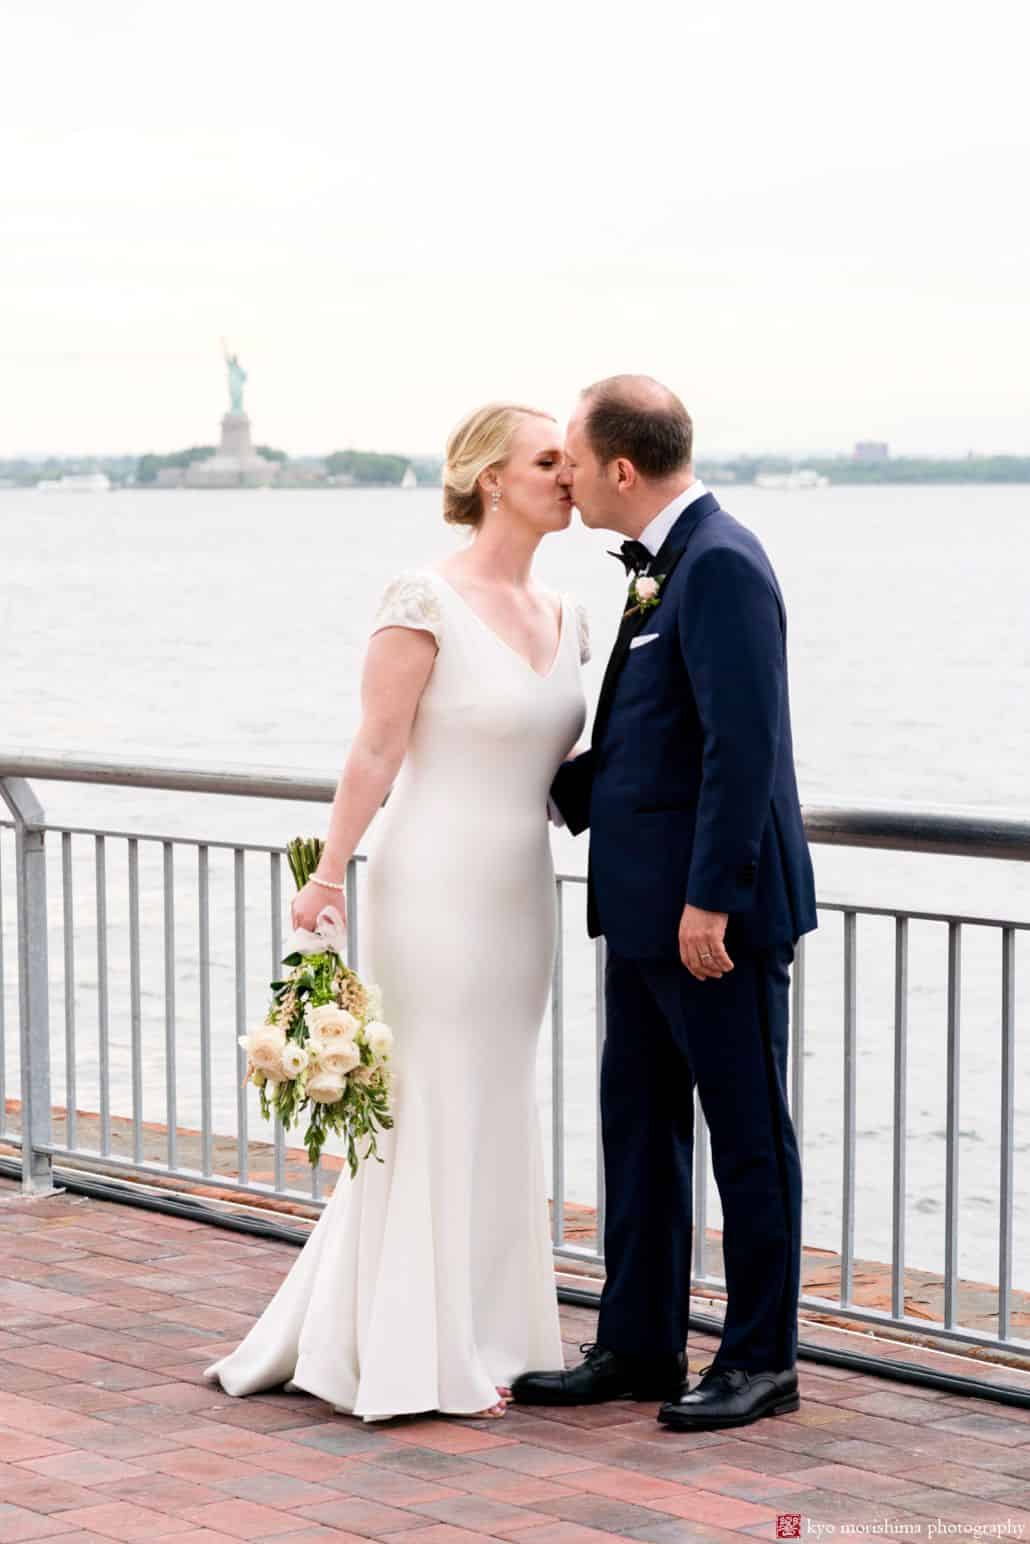 Bride and groom portrait with Statue of Liberty in background -- the Liberty Warehouse wedding venue in Red Hook has some of the best views of any NYC venue